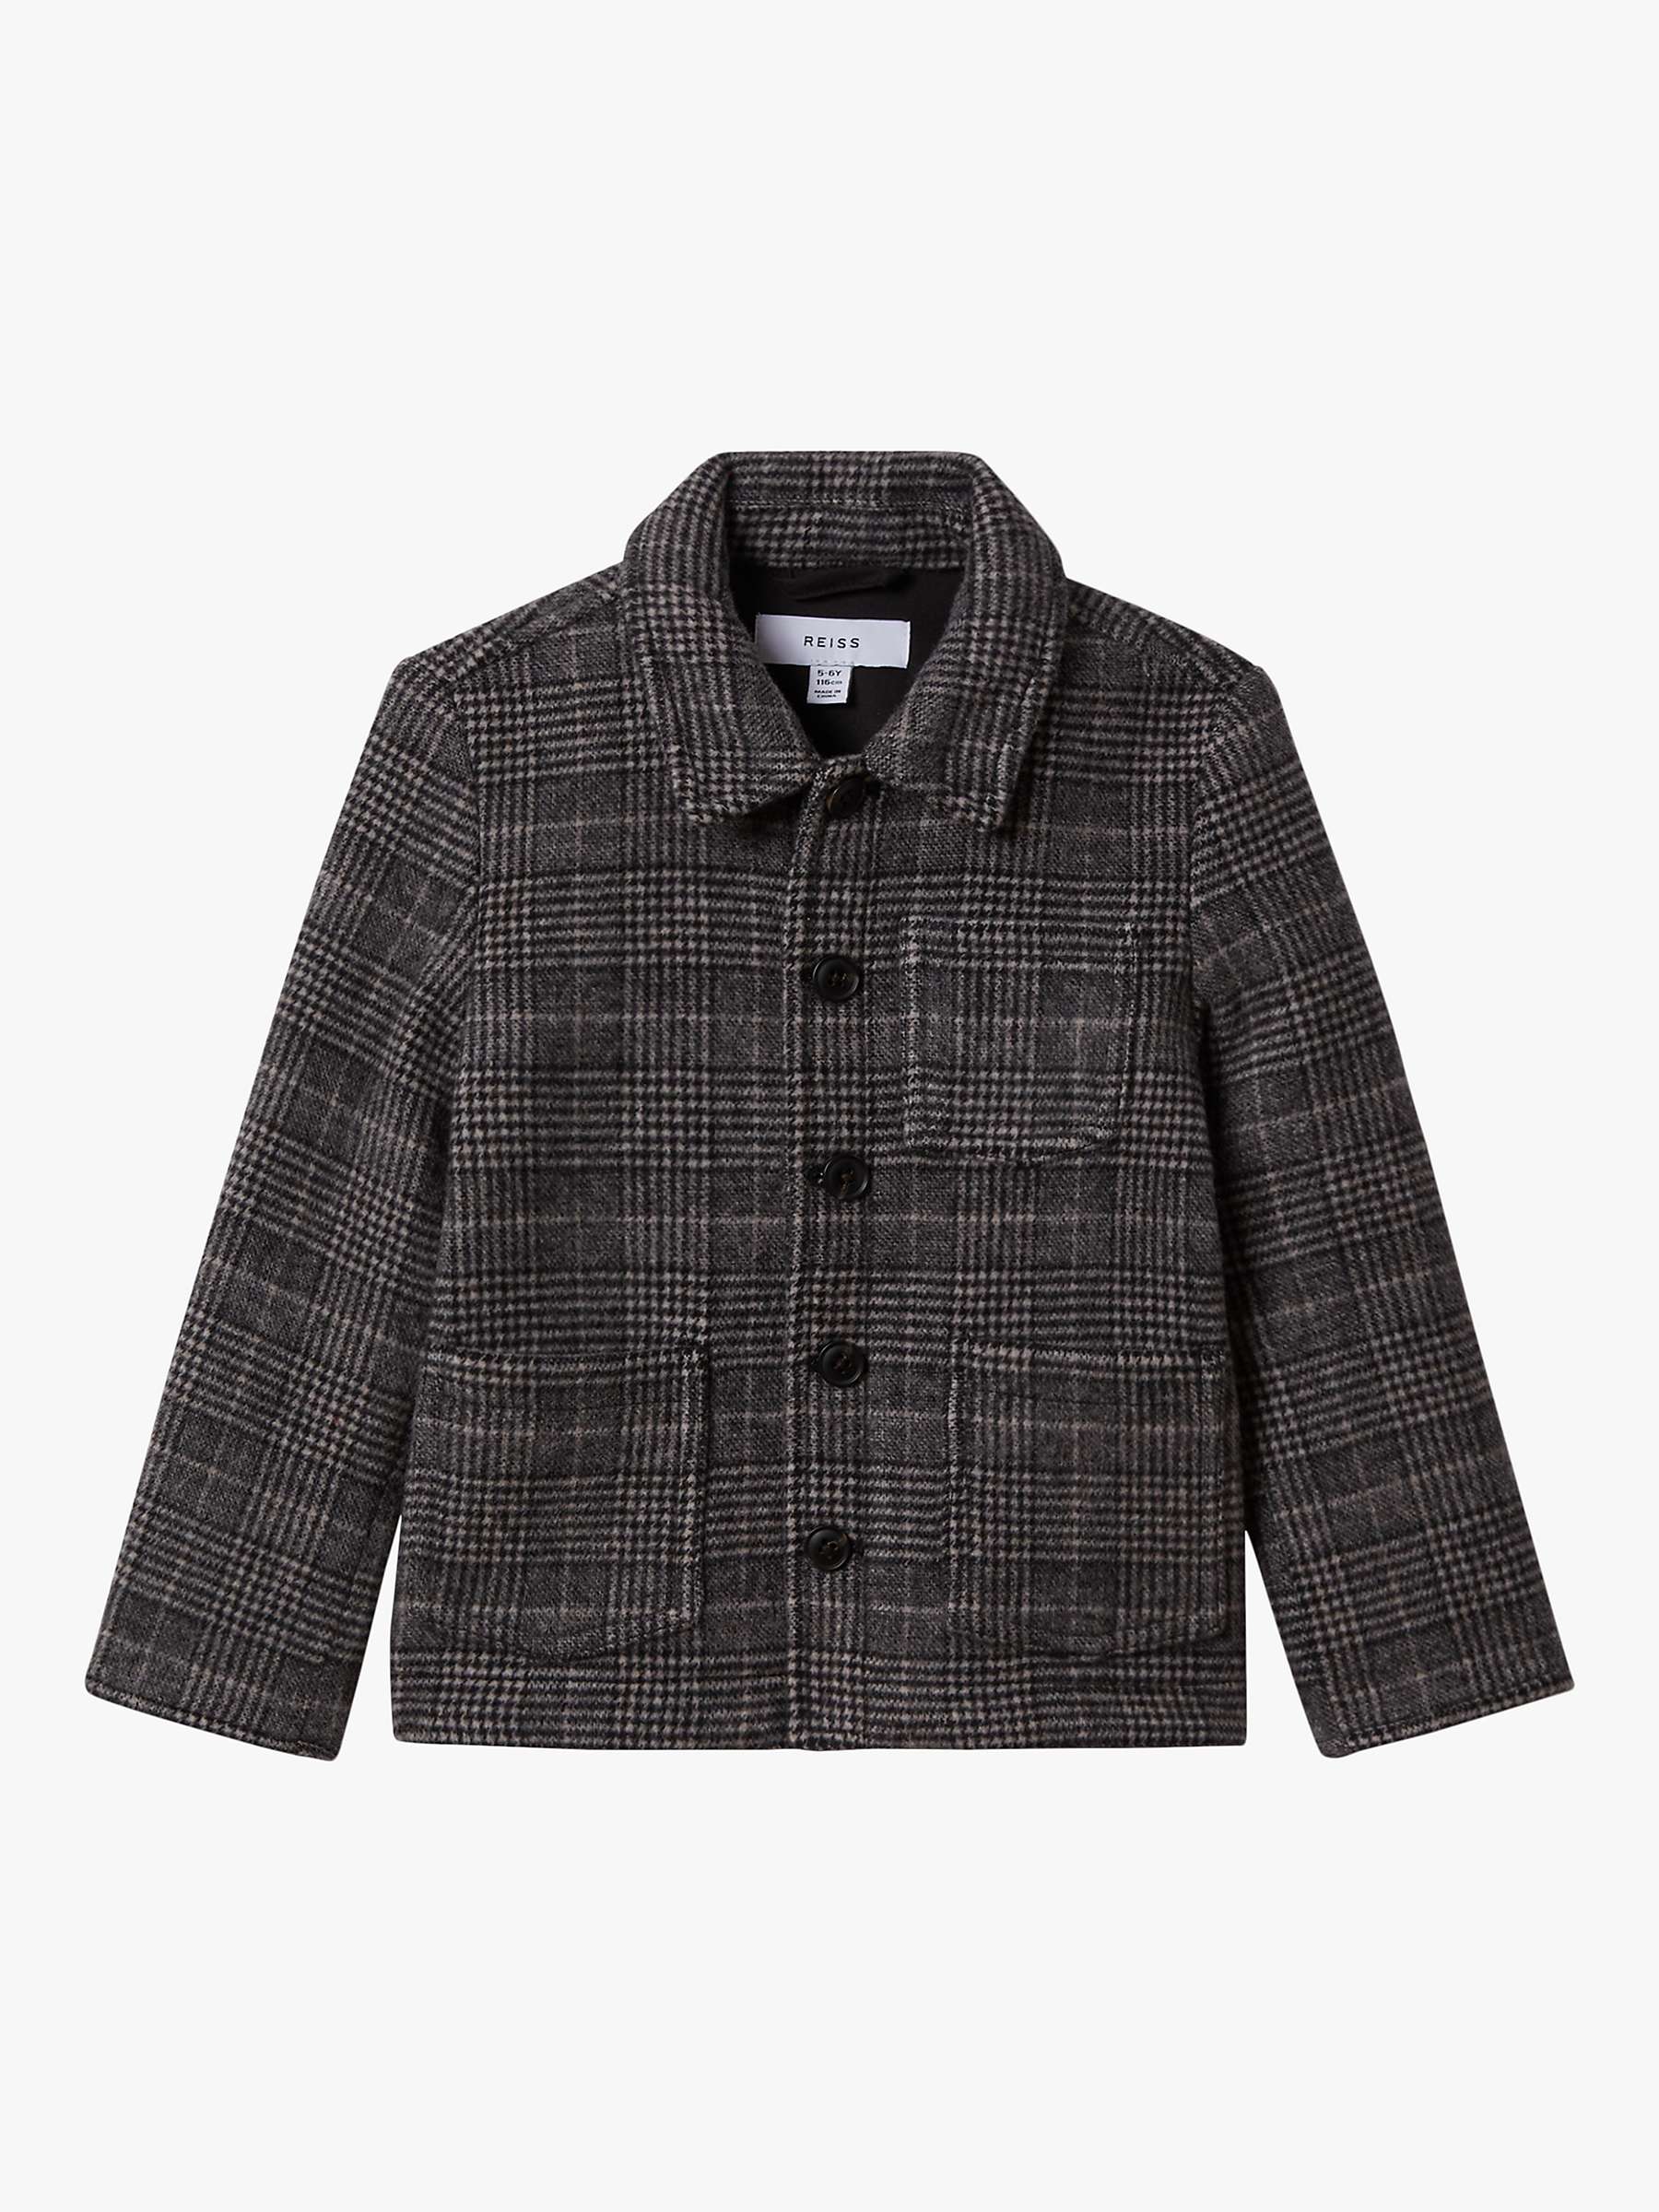 Buy Reiss Kids' Covert Check Button Through Overshirt, Charcoal Online at johnlewis.com